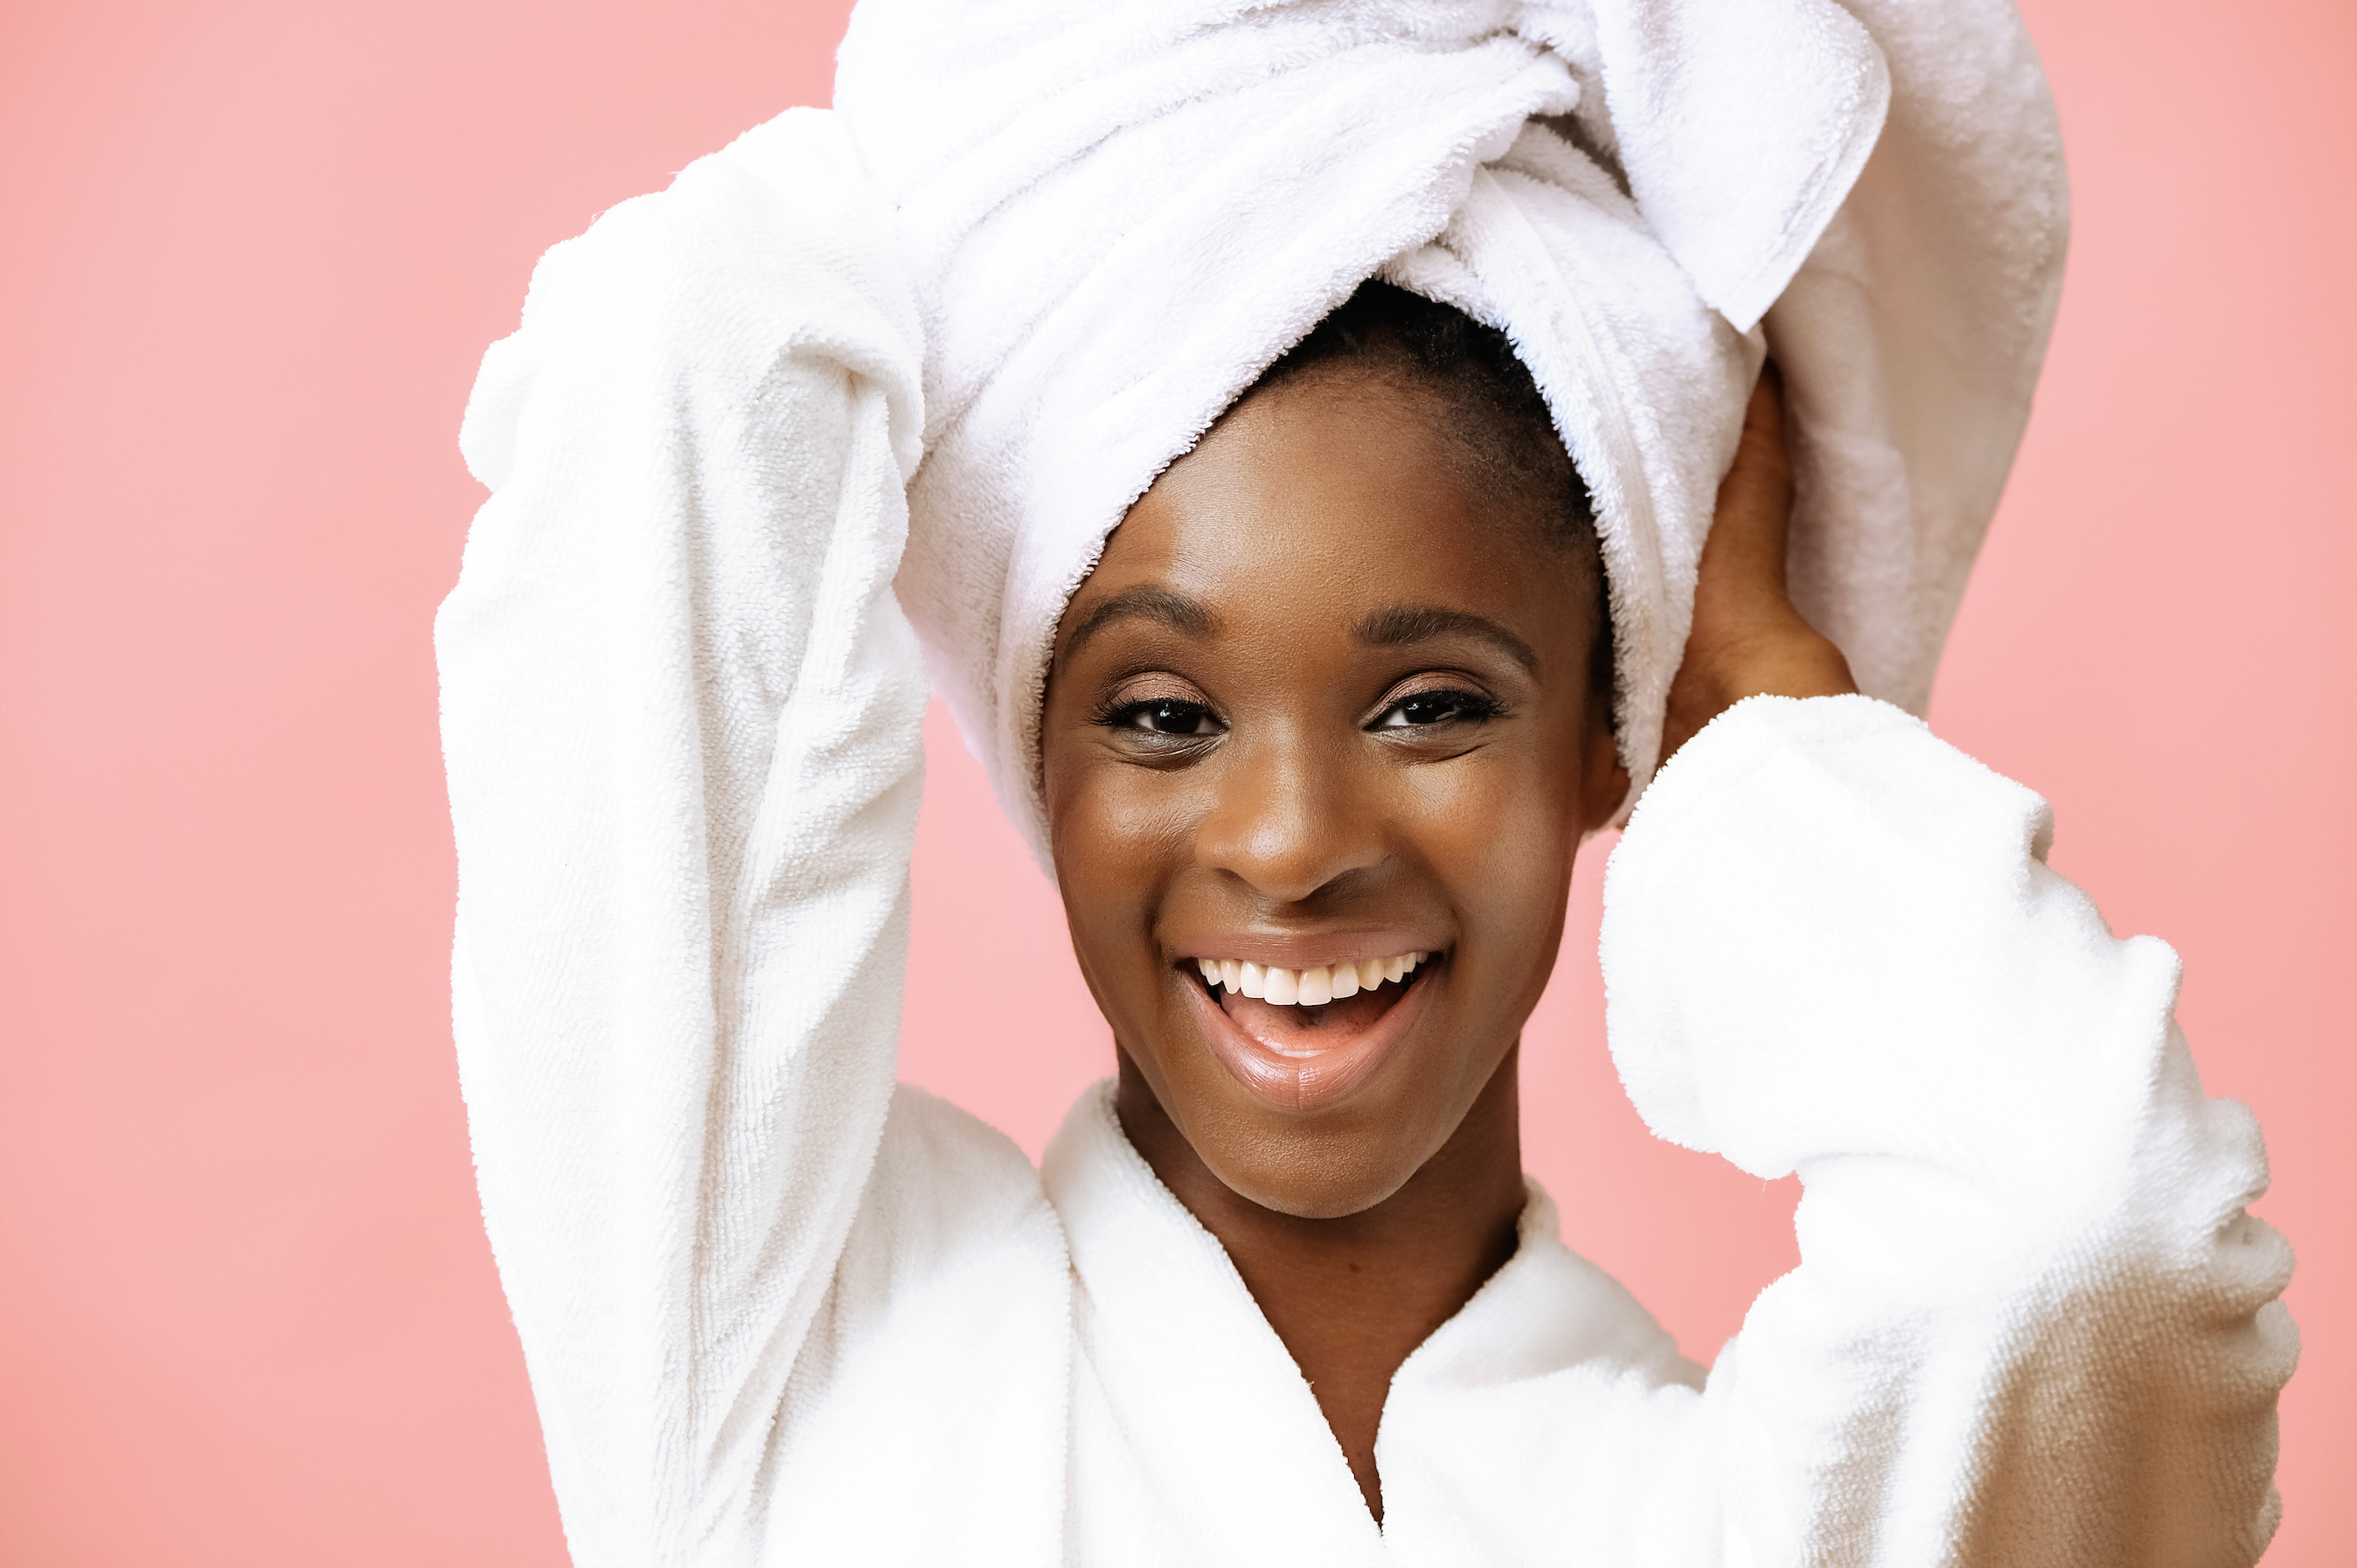 The Top 10 Best Products for Washing 4c Hair